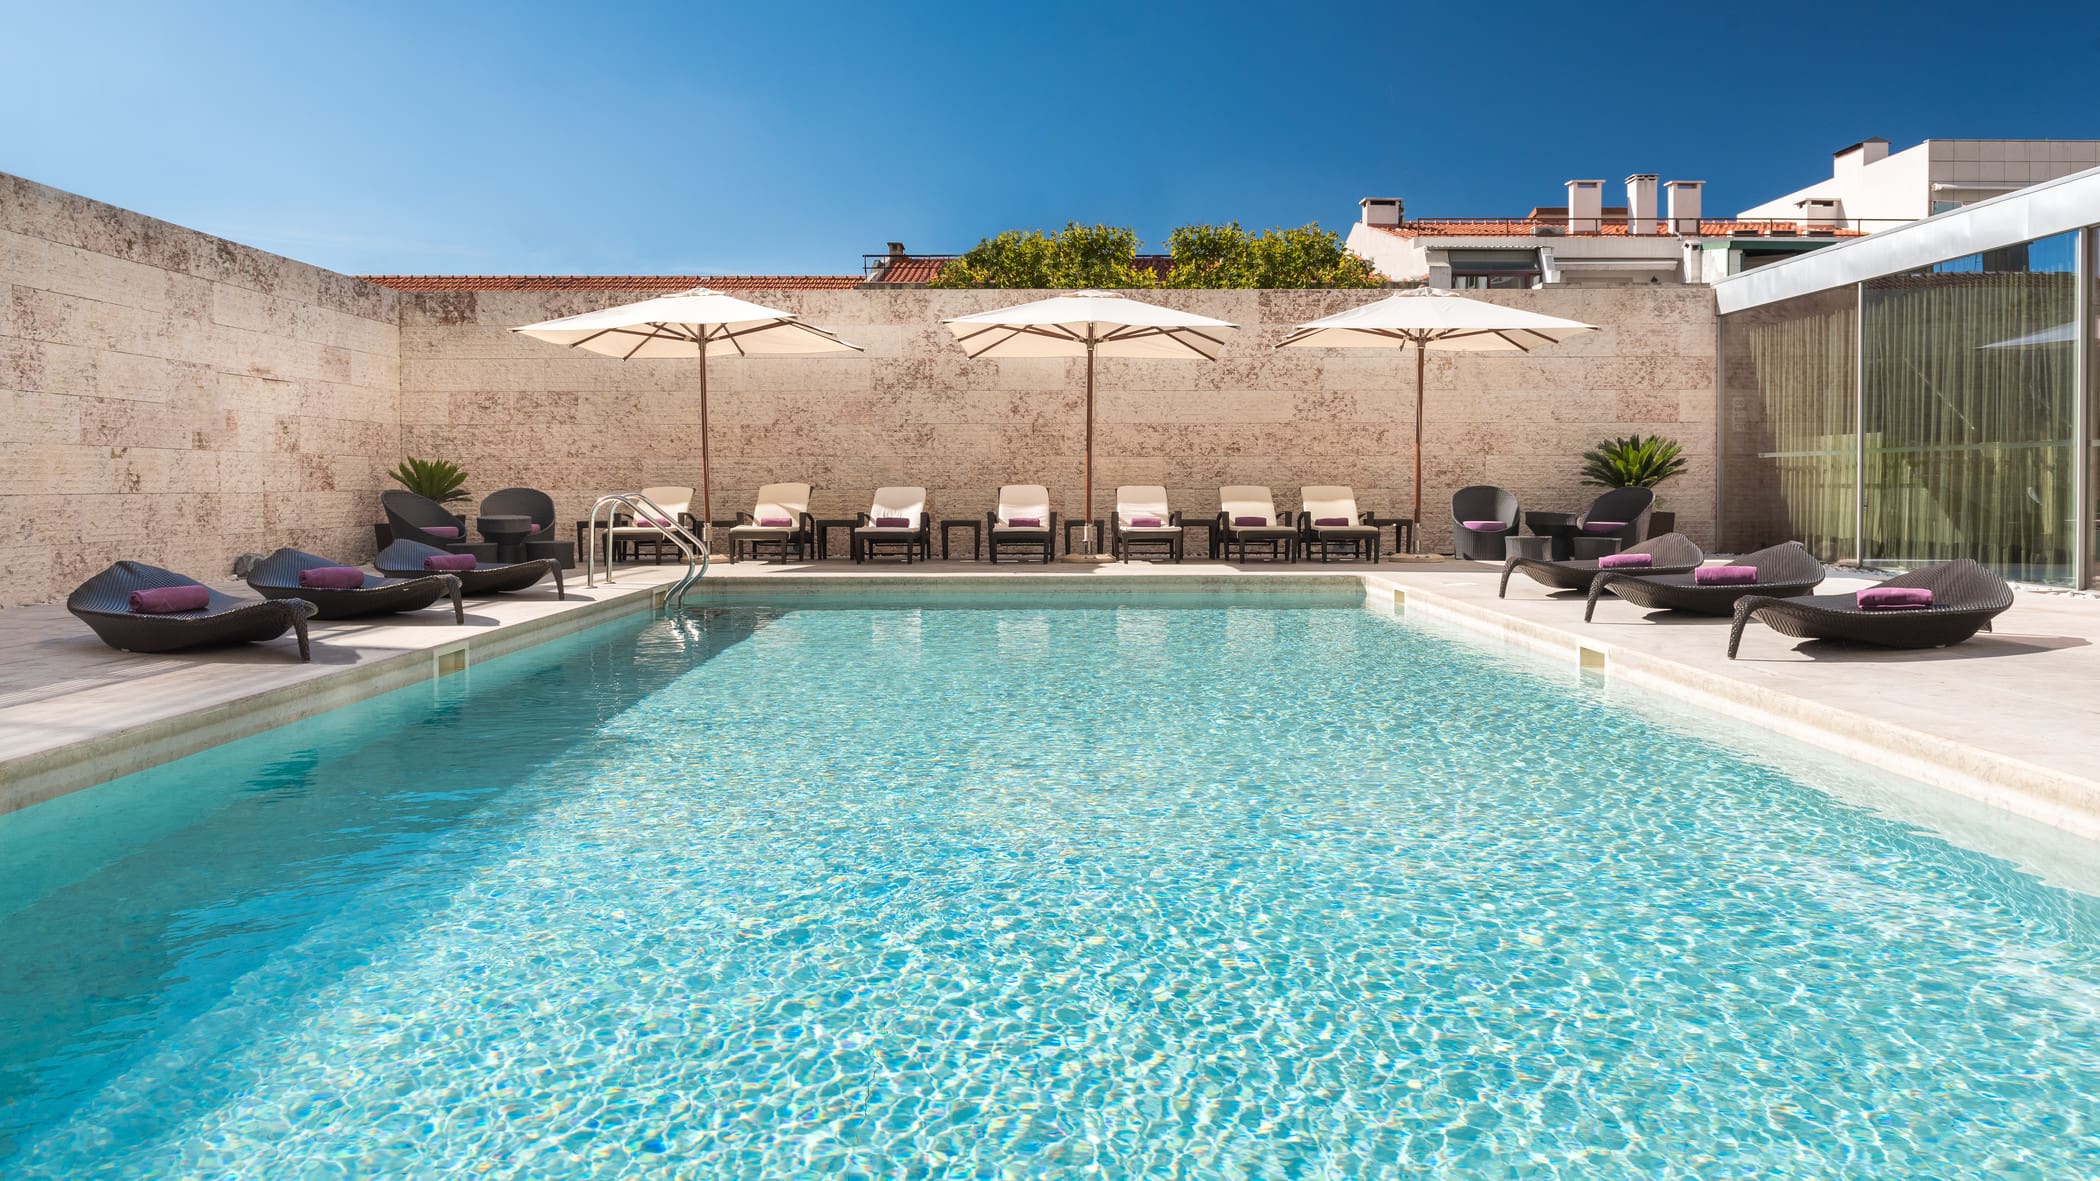 Pool des Sheraton Hotels in Lissabon